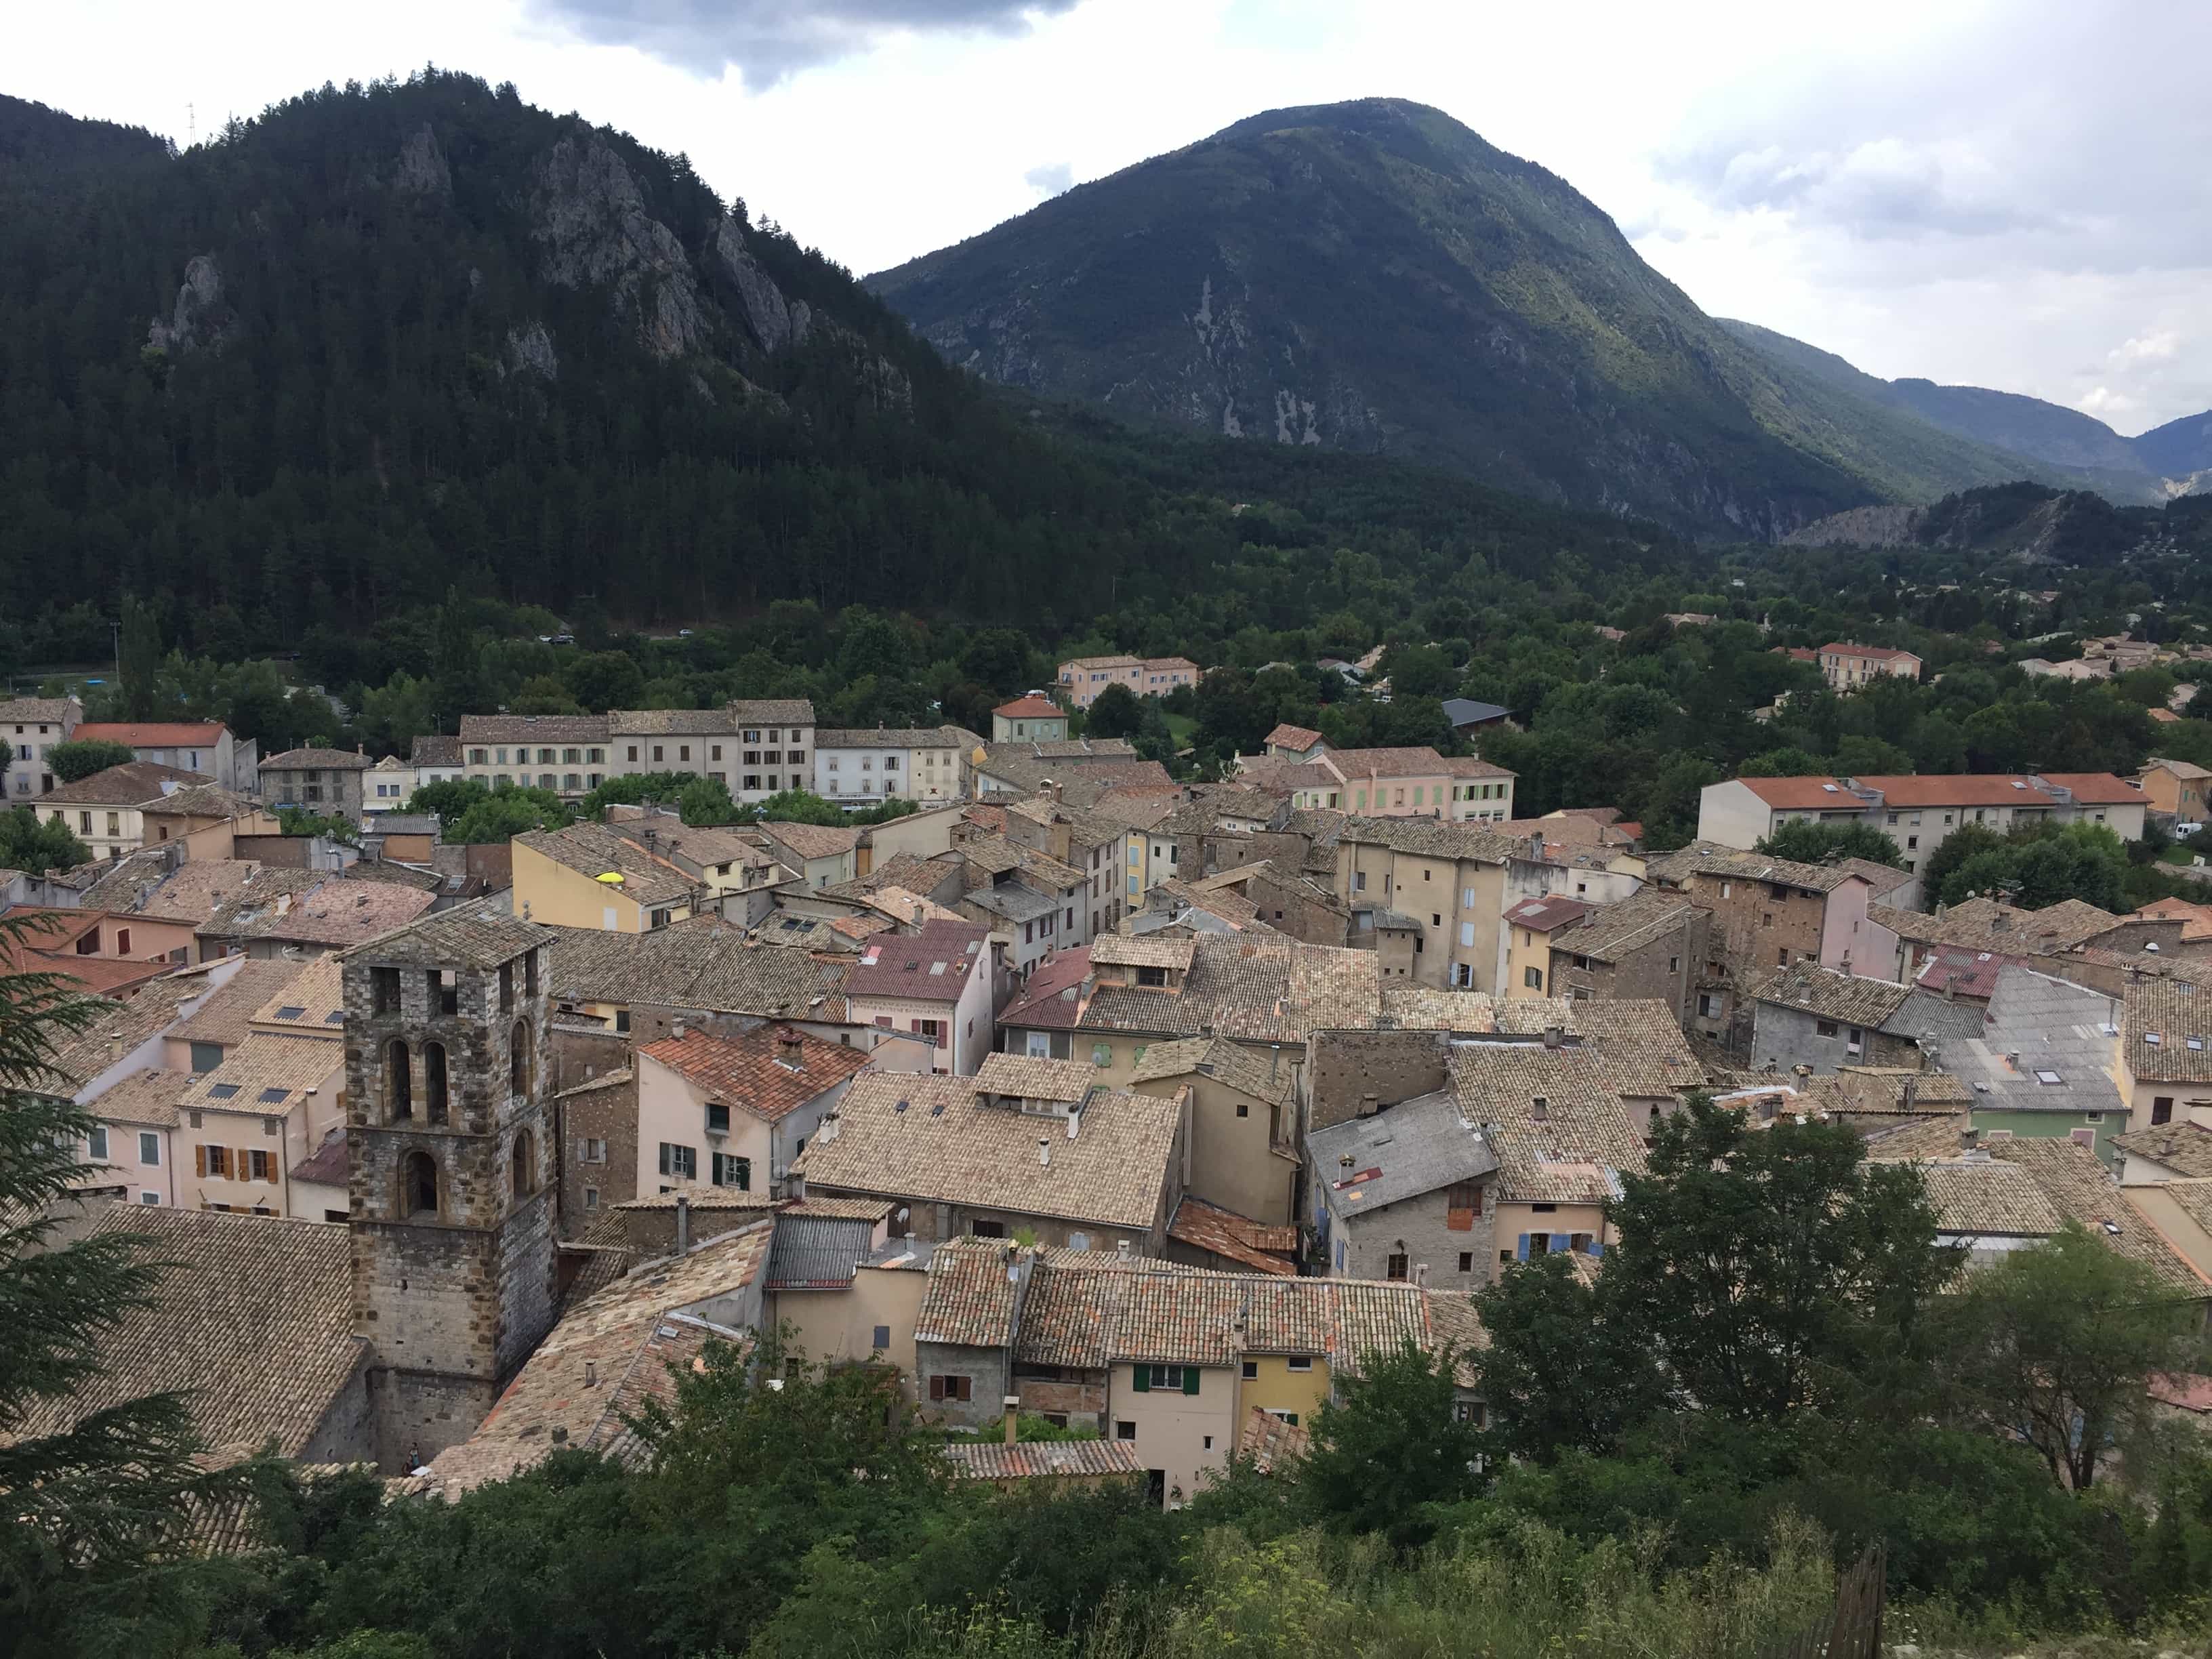 Views of Castellane from on high